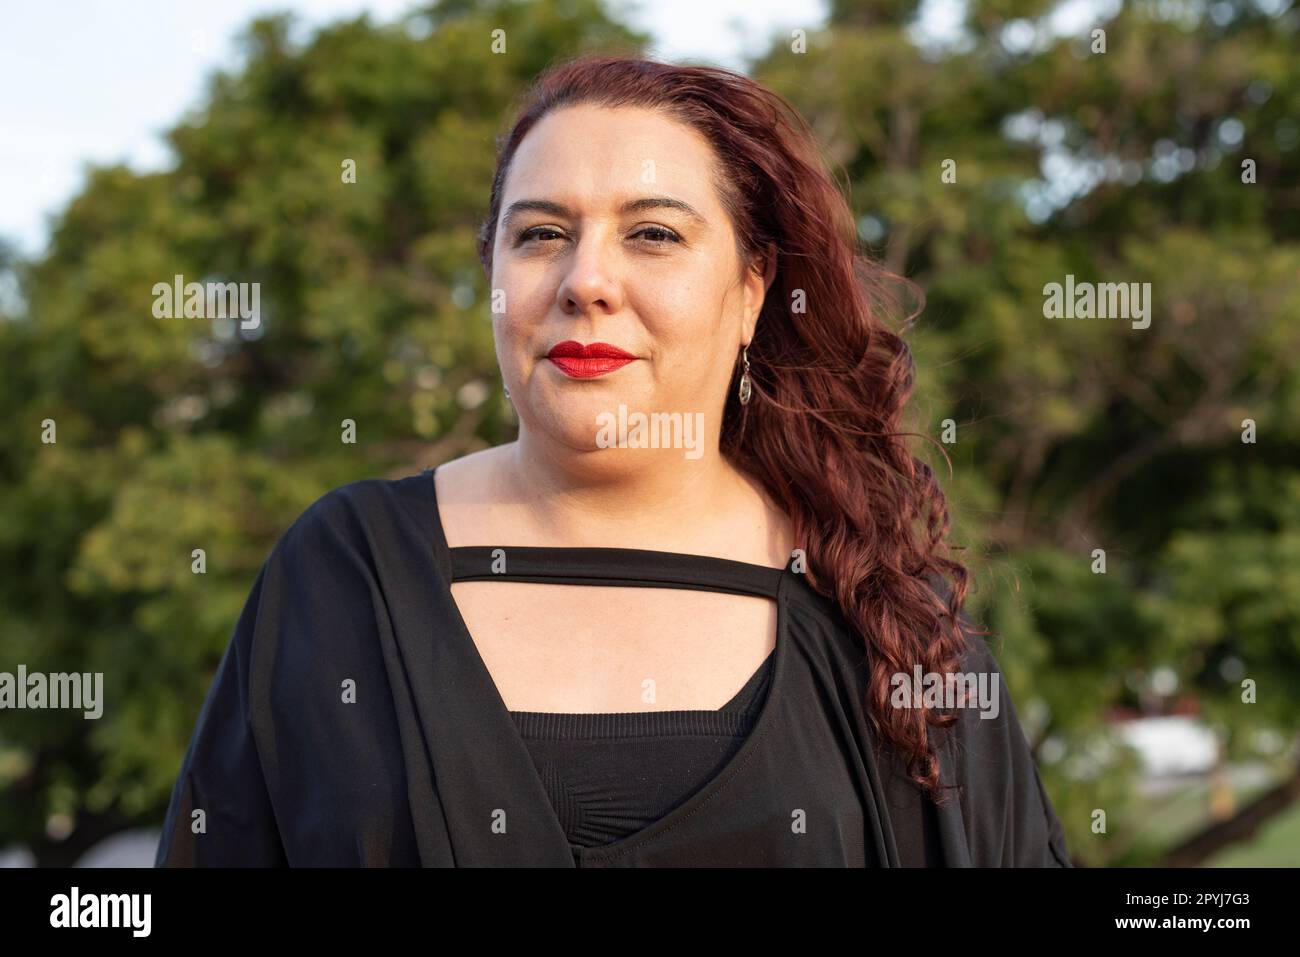 Portrait of a plus-size woman looking at camera in nature background Stock Photo